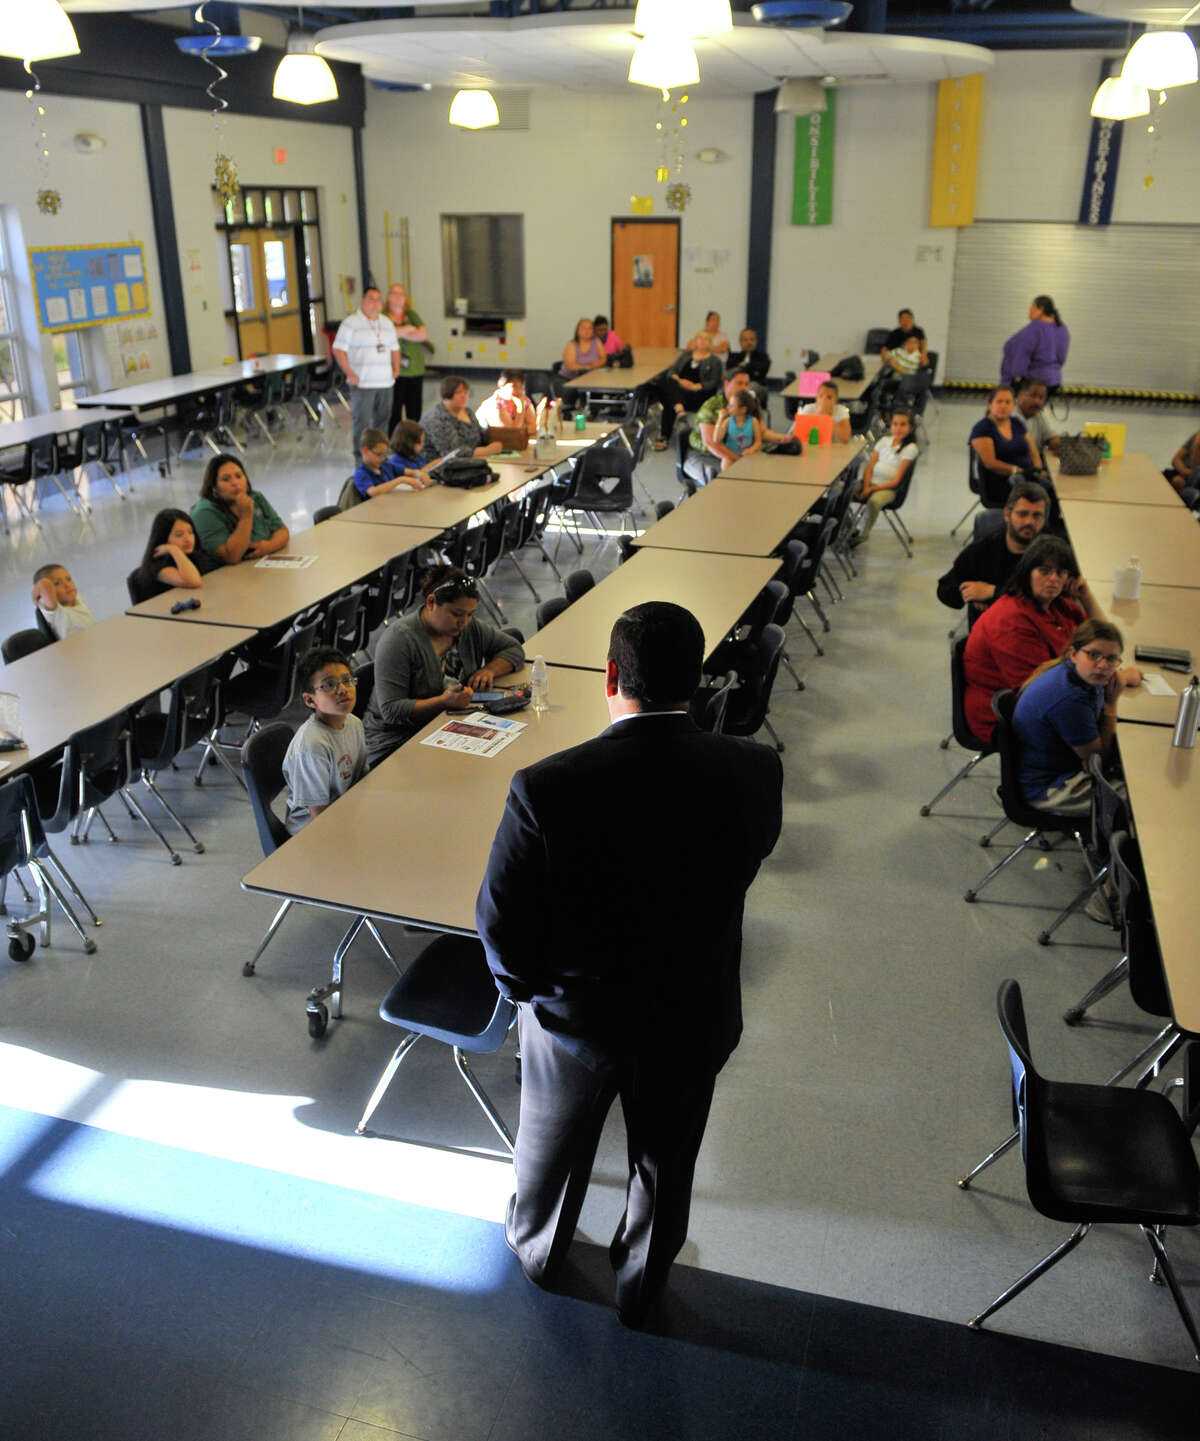 Edgewood ISD Chief Executive of Finance and Operations Eddie Ramirez answers questions about the districts new 6th Grade Acadenmy duribg a session with parents and students at Roosevelt Elementary School Tuesday evening.